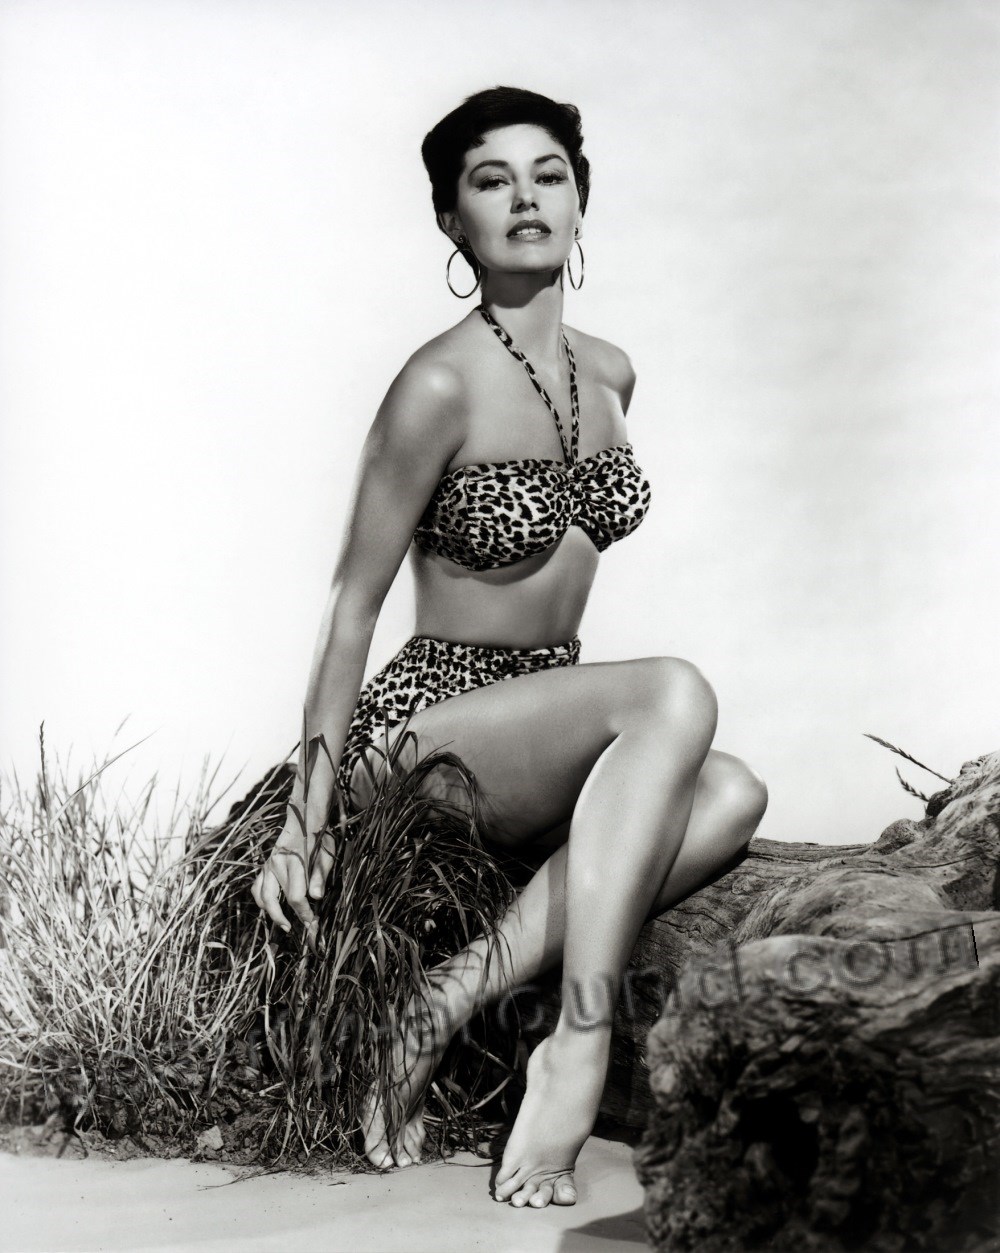  Cyd Charisse an American actress and dancer photo